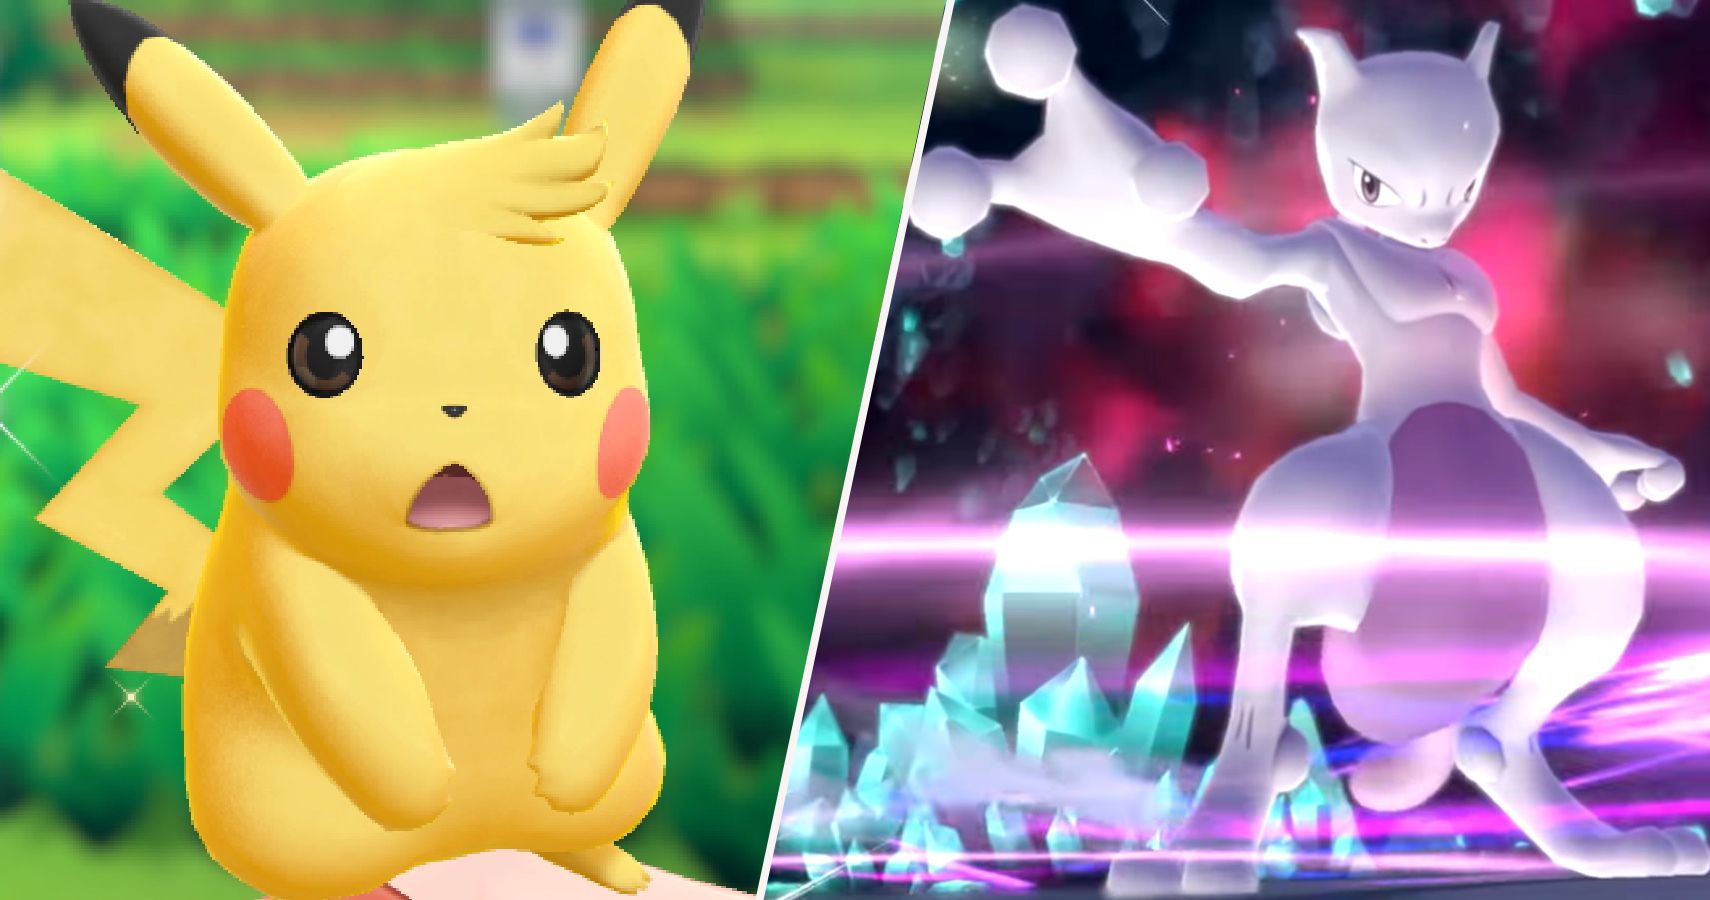 Mewtwo - Pokemon: Let's Go, Pikachu! Guide - IGN